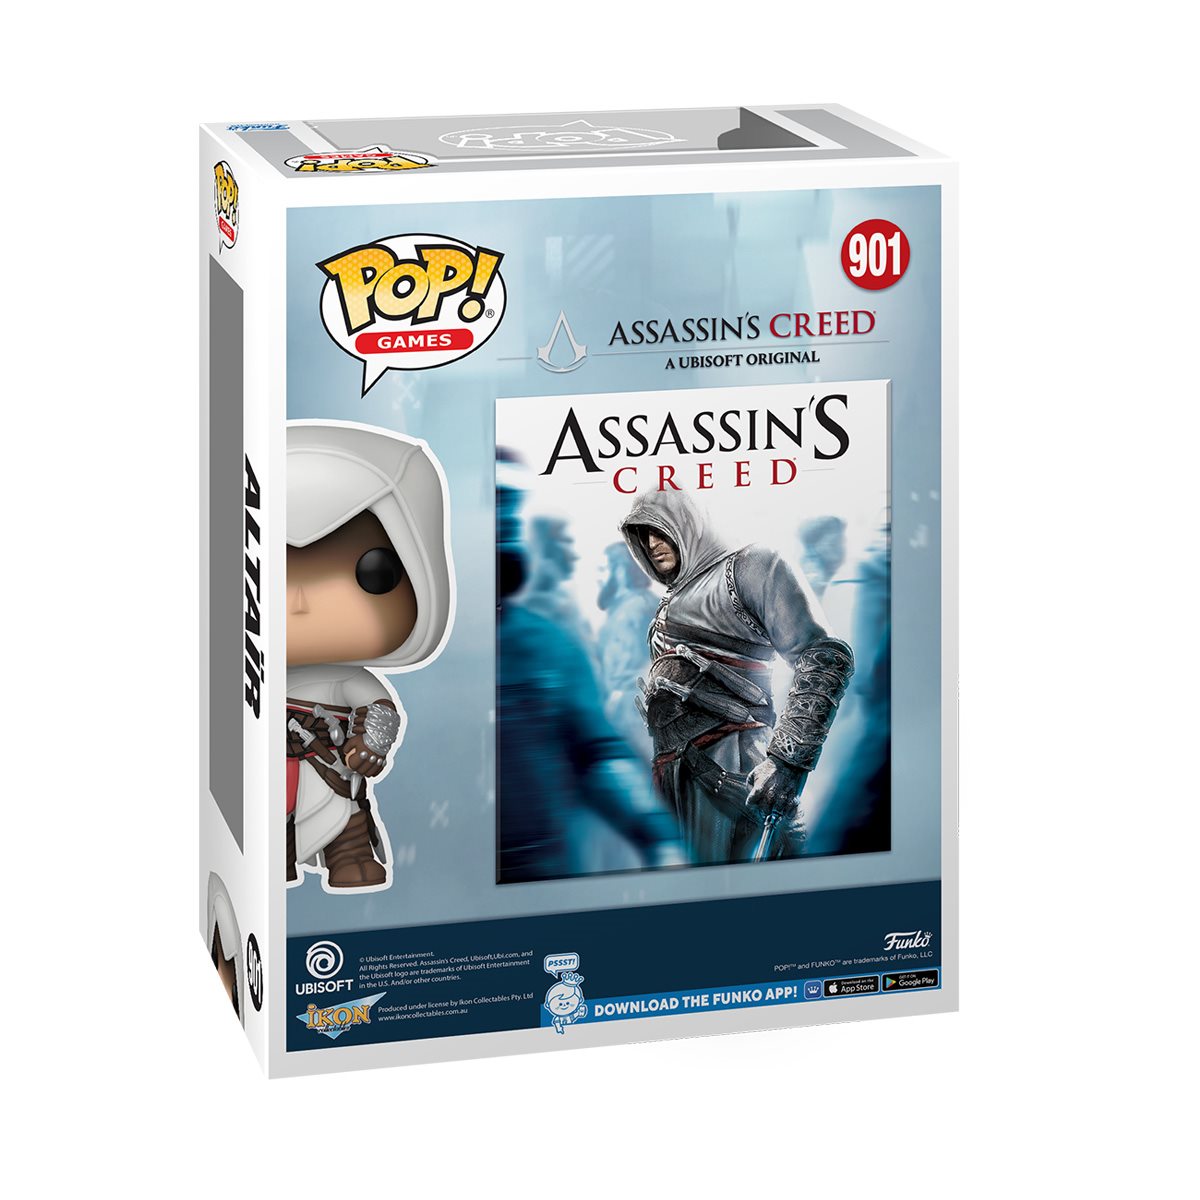 haai Stuwkracht pit Assassin's Creed Altair Pop! Game Cover Figure with Case